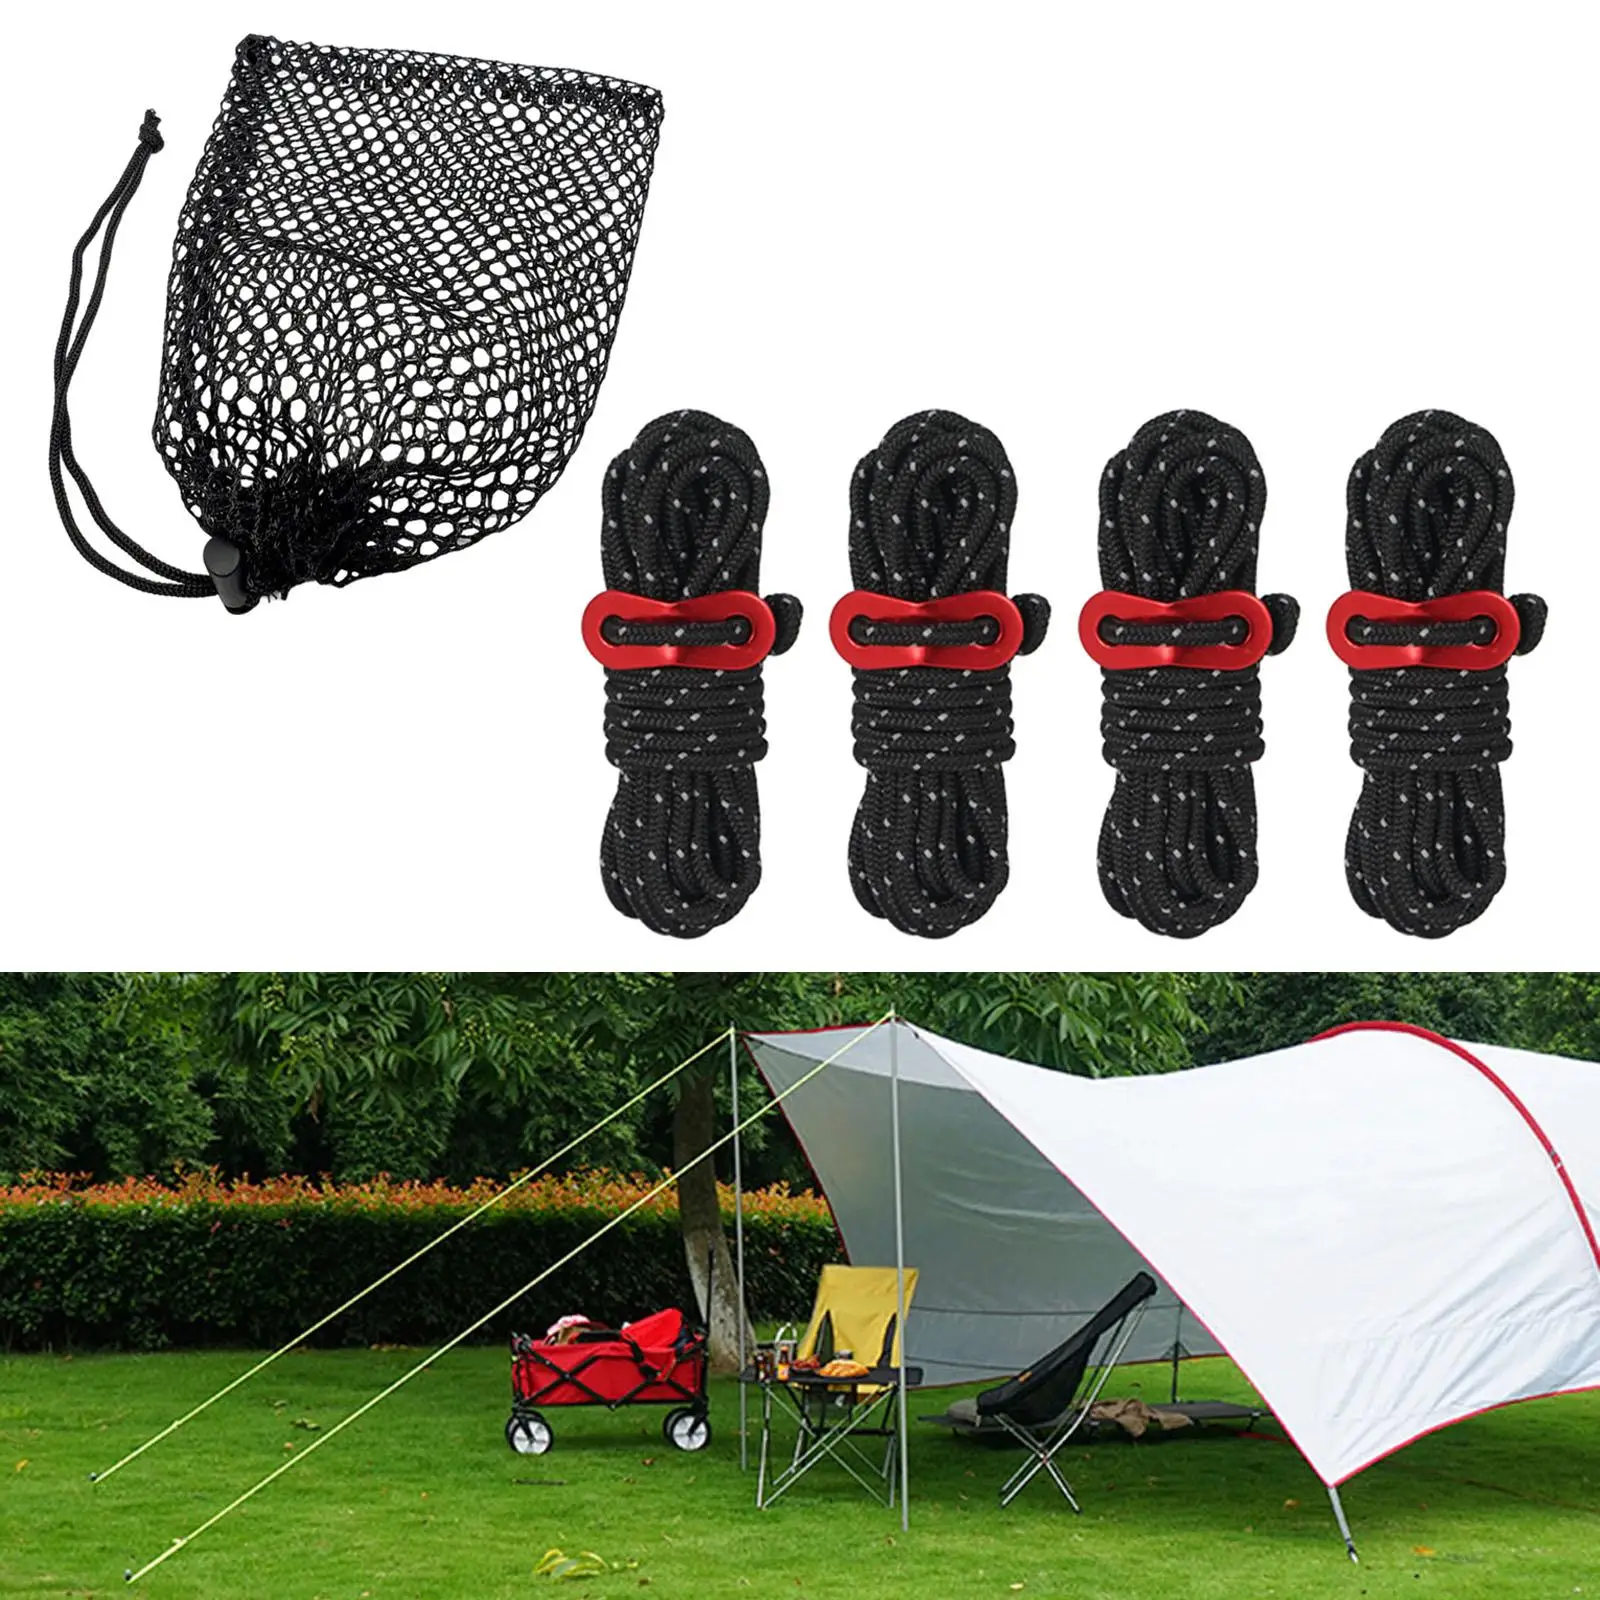 Lightweight High Tensile Reflective Tent Rope with Lanyard to Tie Down Tarps, Camping Tent, Outer Packing